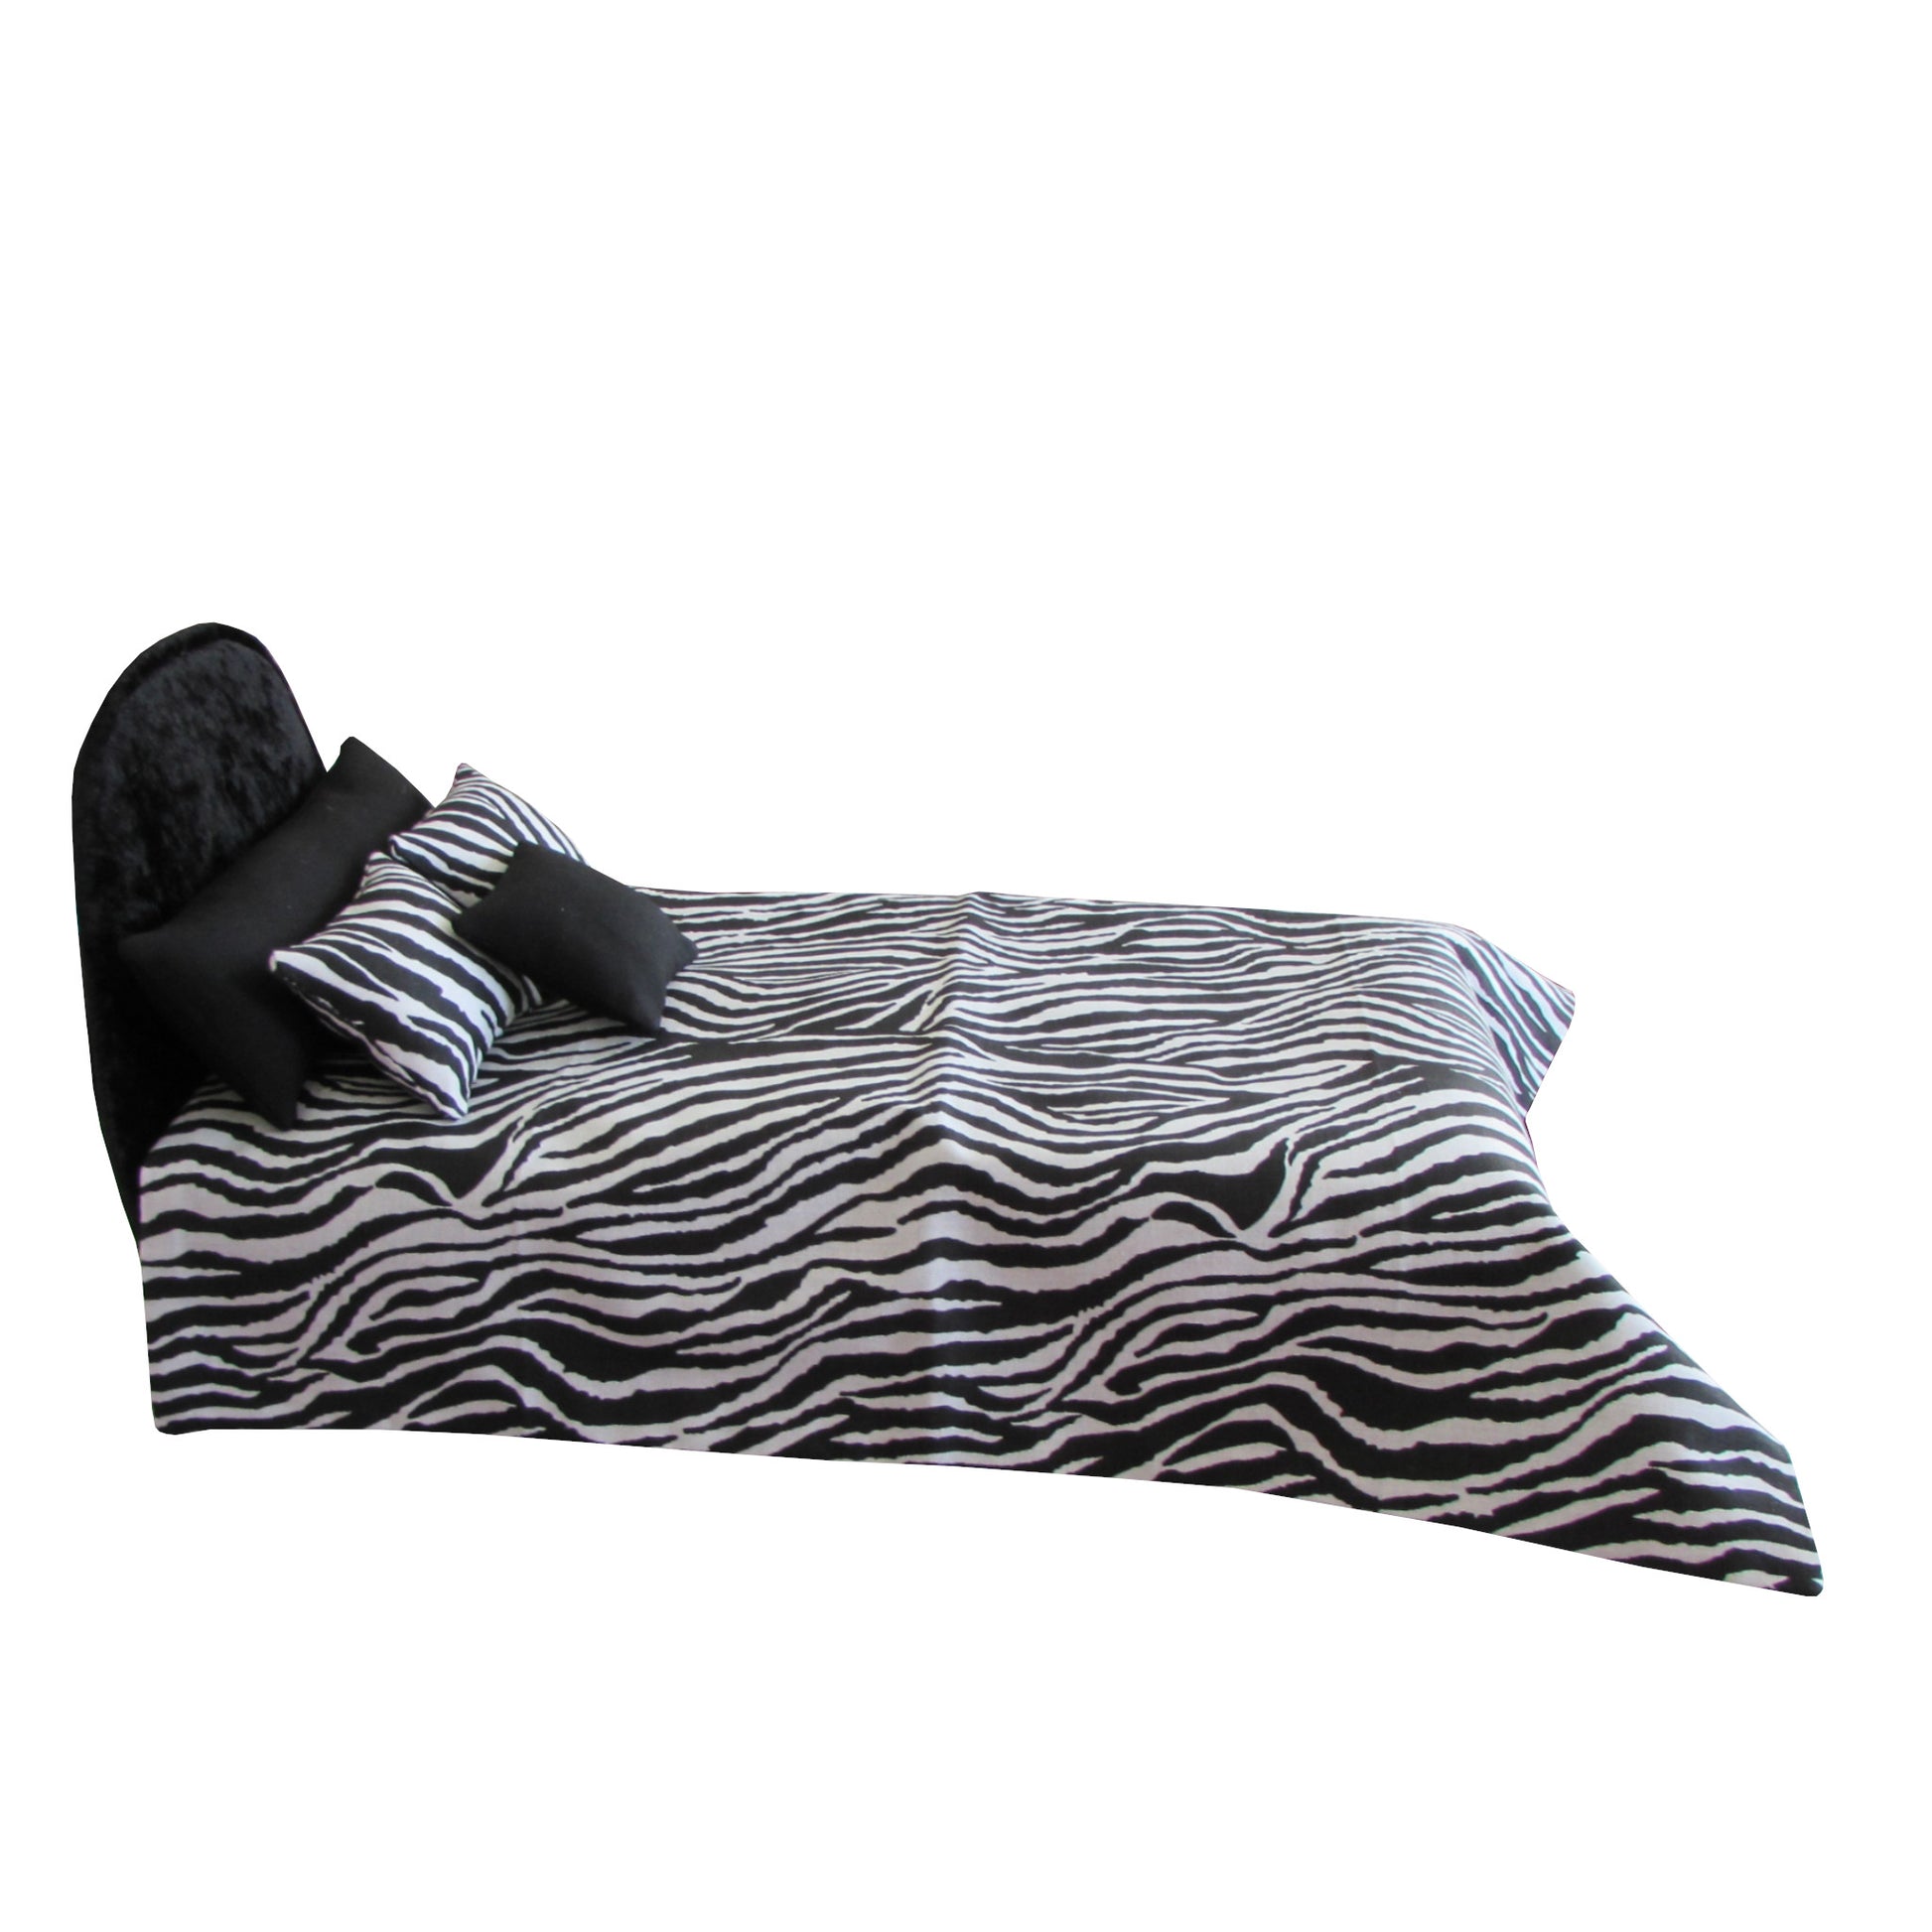 Zebra Print Double Bed Doll Bedding for 11.5-inch and 12-inch dolls